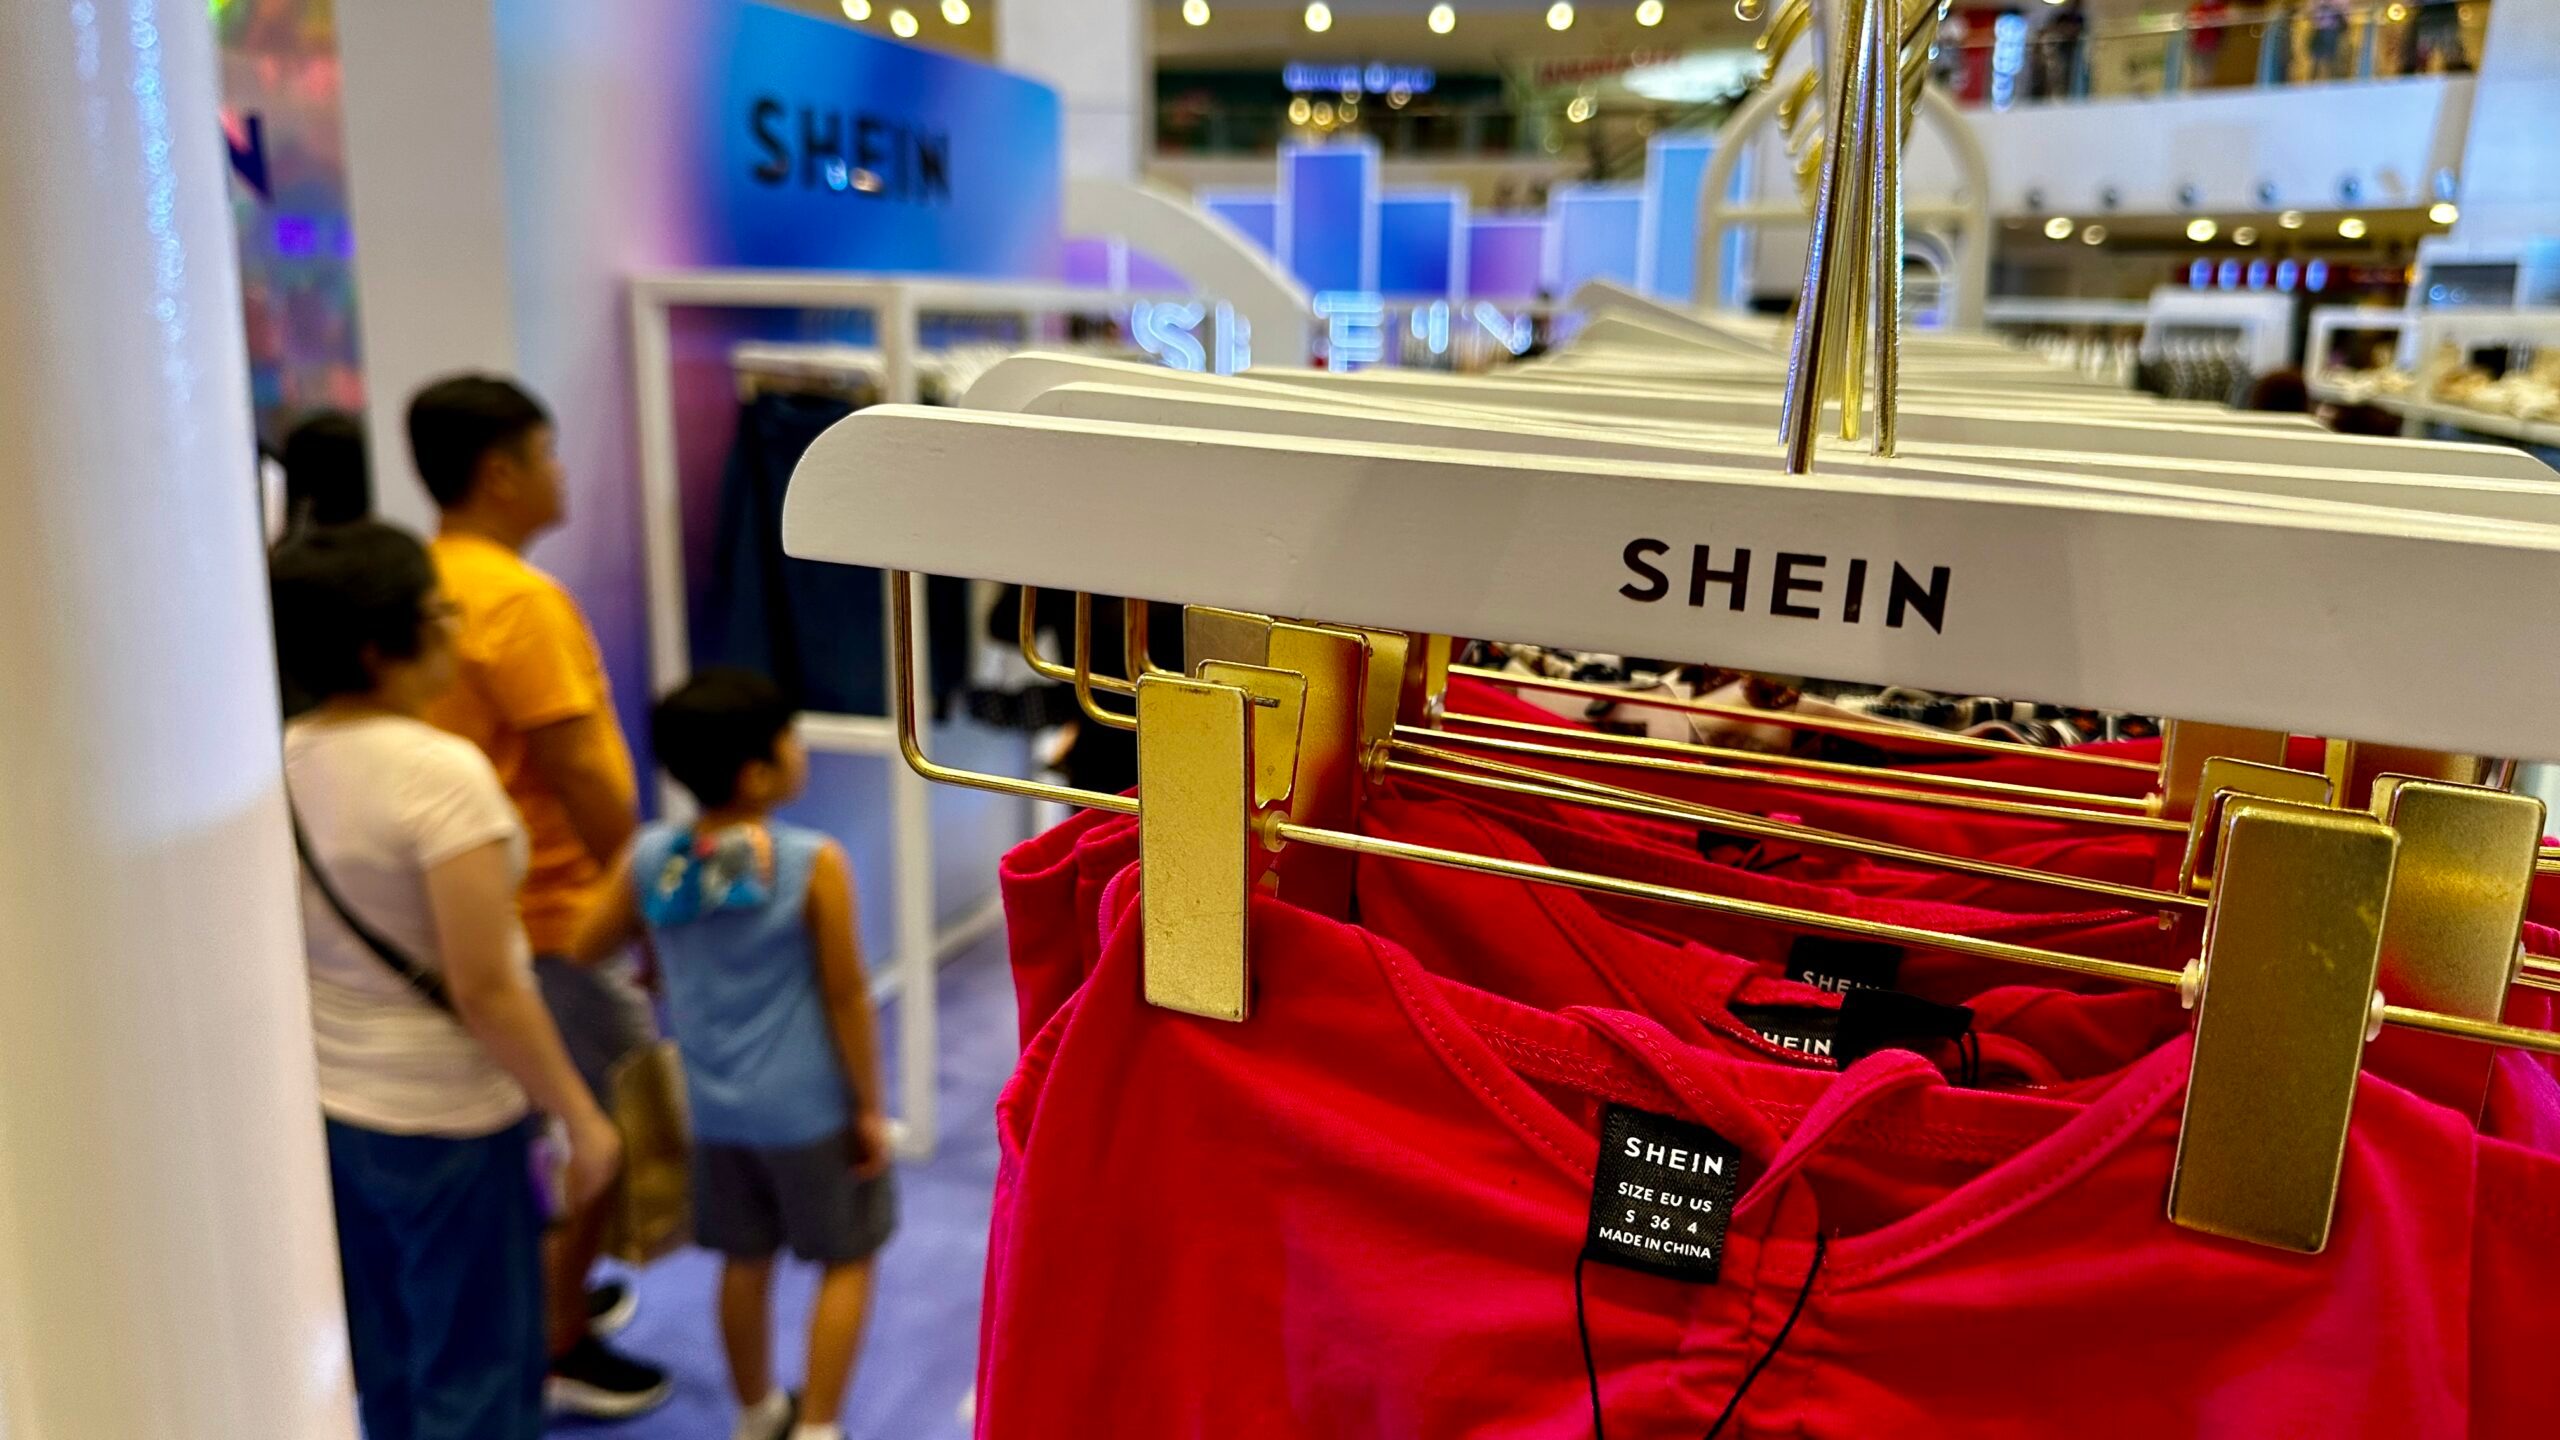 Gen Z’s sustainability mindset reshaping retail; Shein says it is taking note